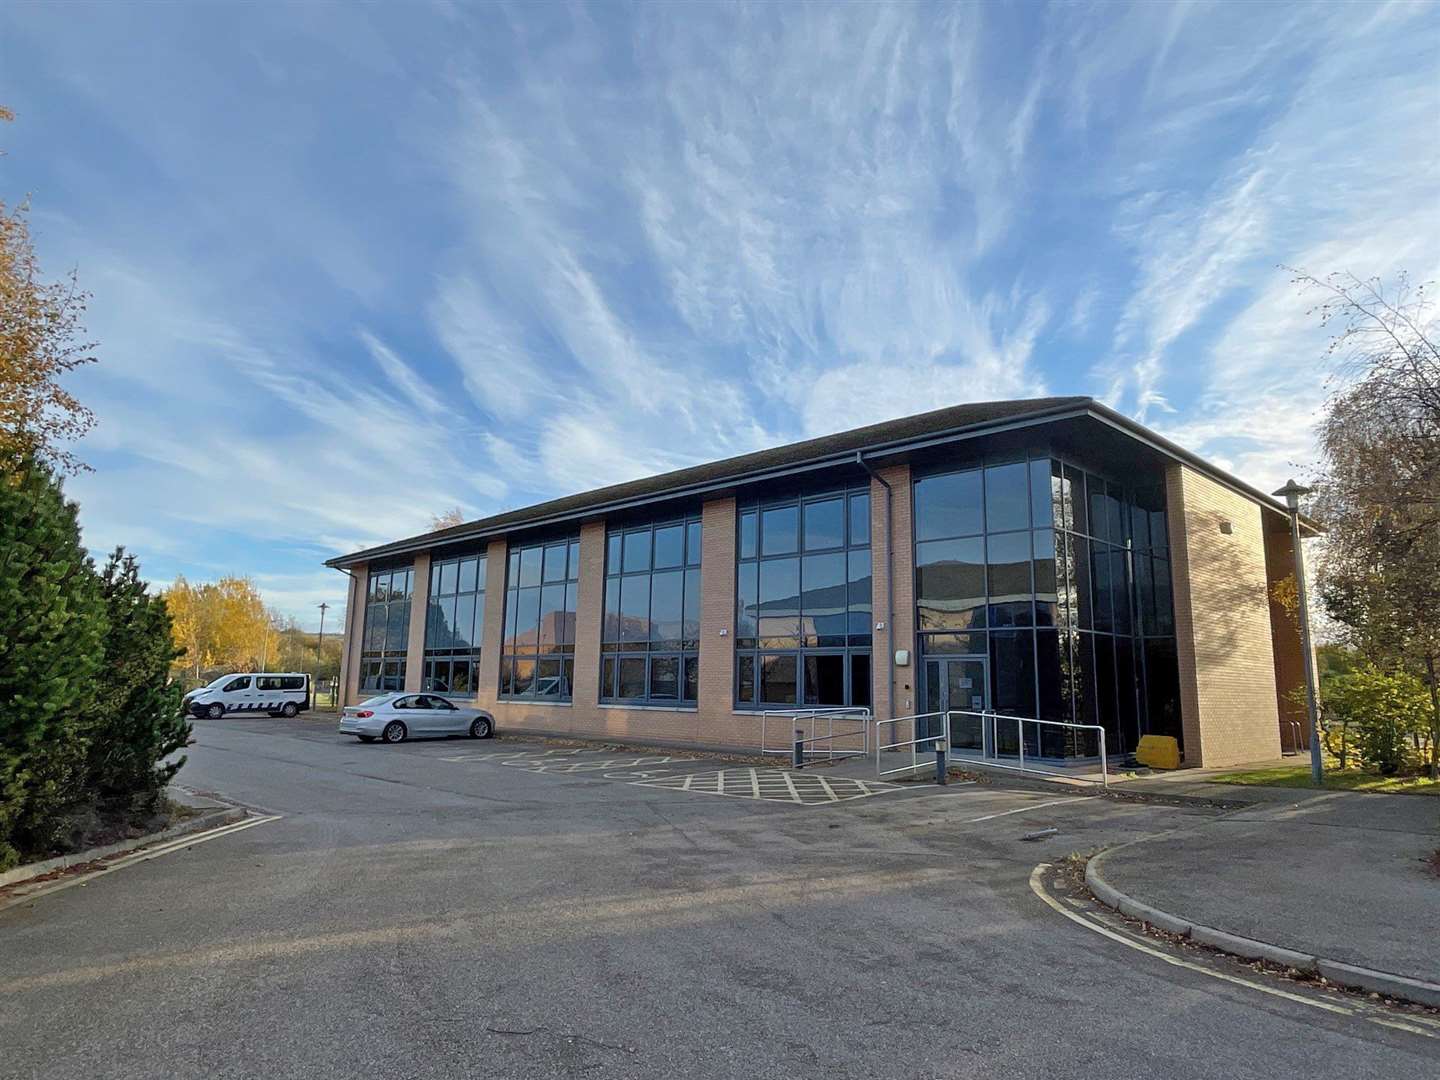 Forestry and Land Scotland building in Inverness which is up for sale.